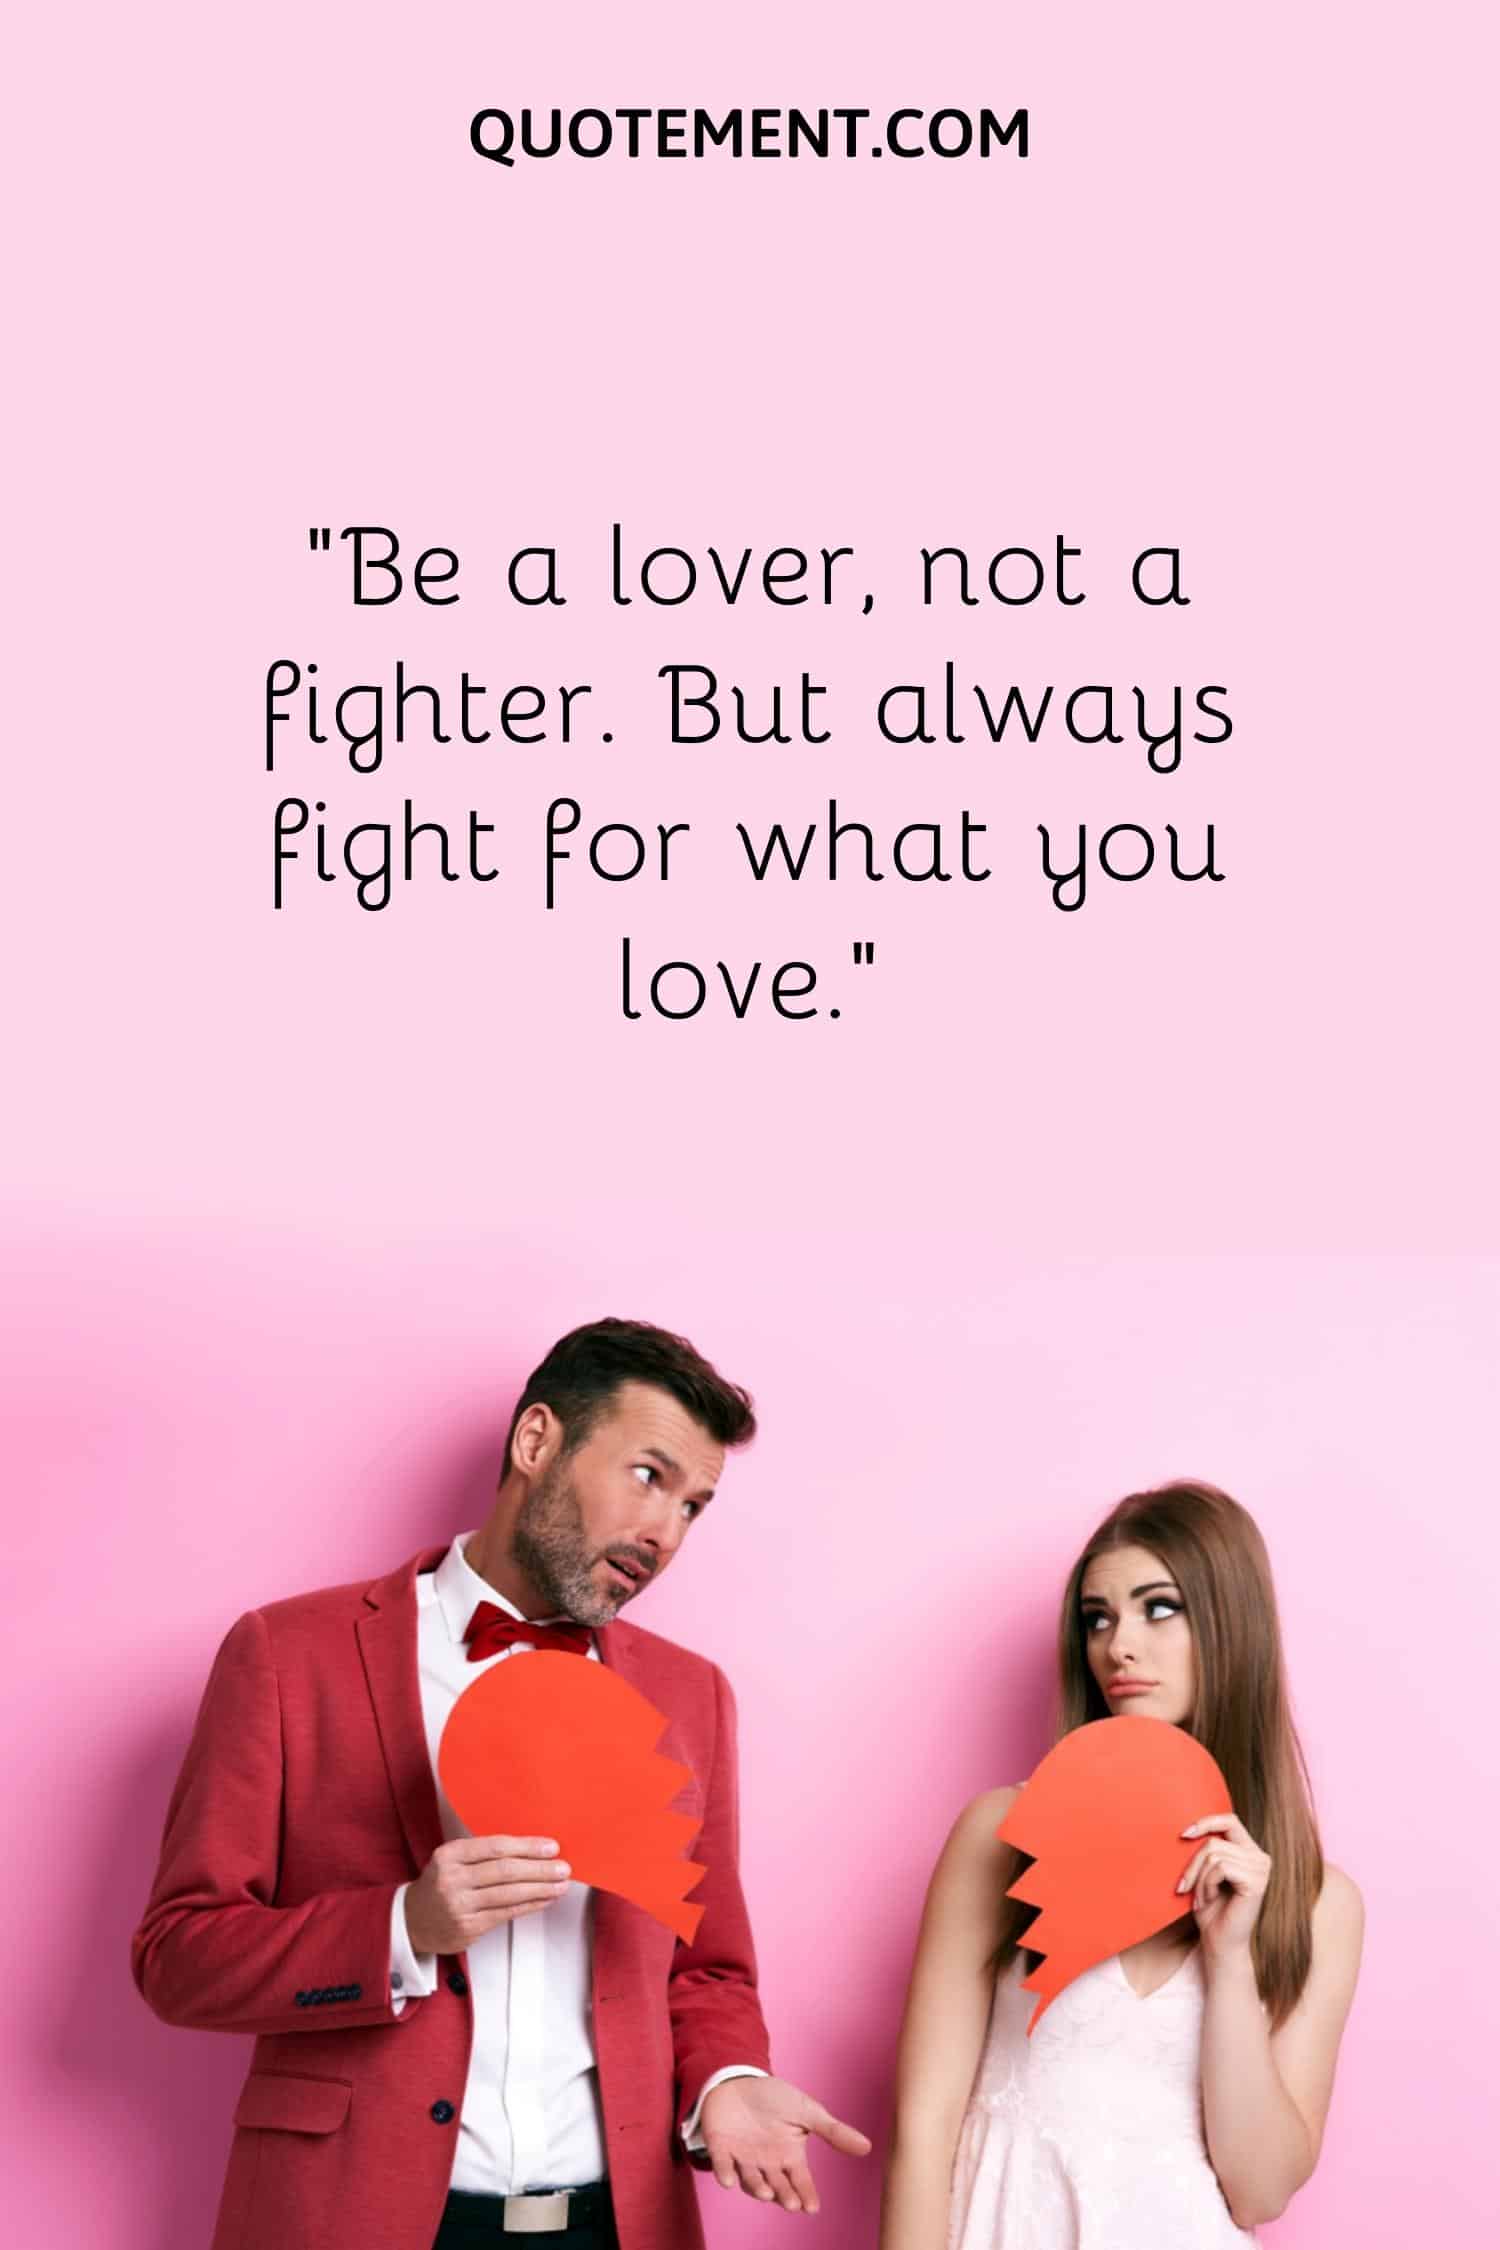 “Be a lover, not a fighter. But always fight for what you love.”